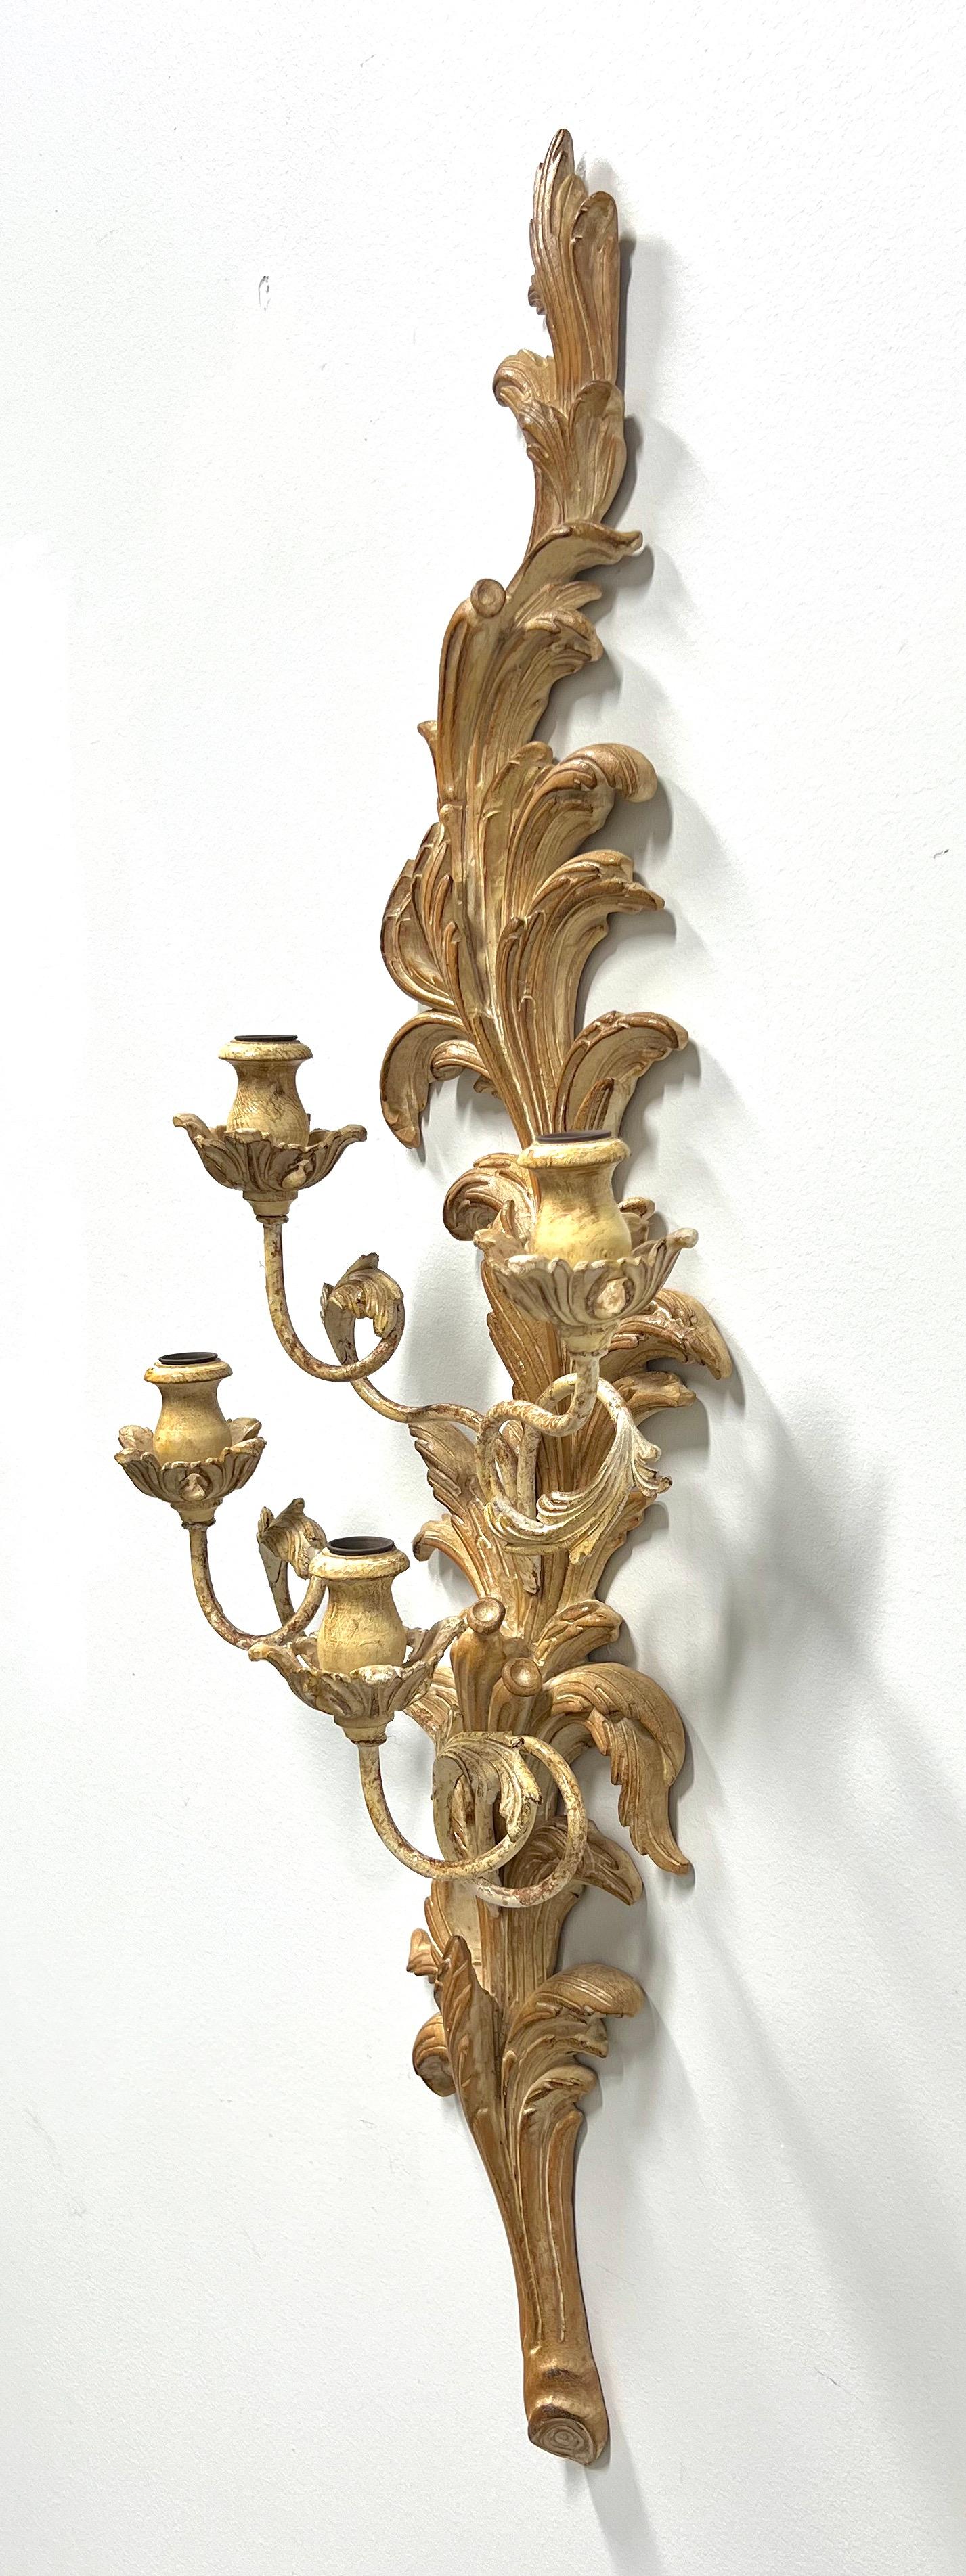 Rococo MARBRO LAMP 1980's Large Whitewashed Wood Foliate Carved Candle Sconce